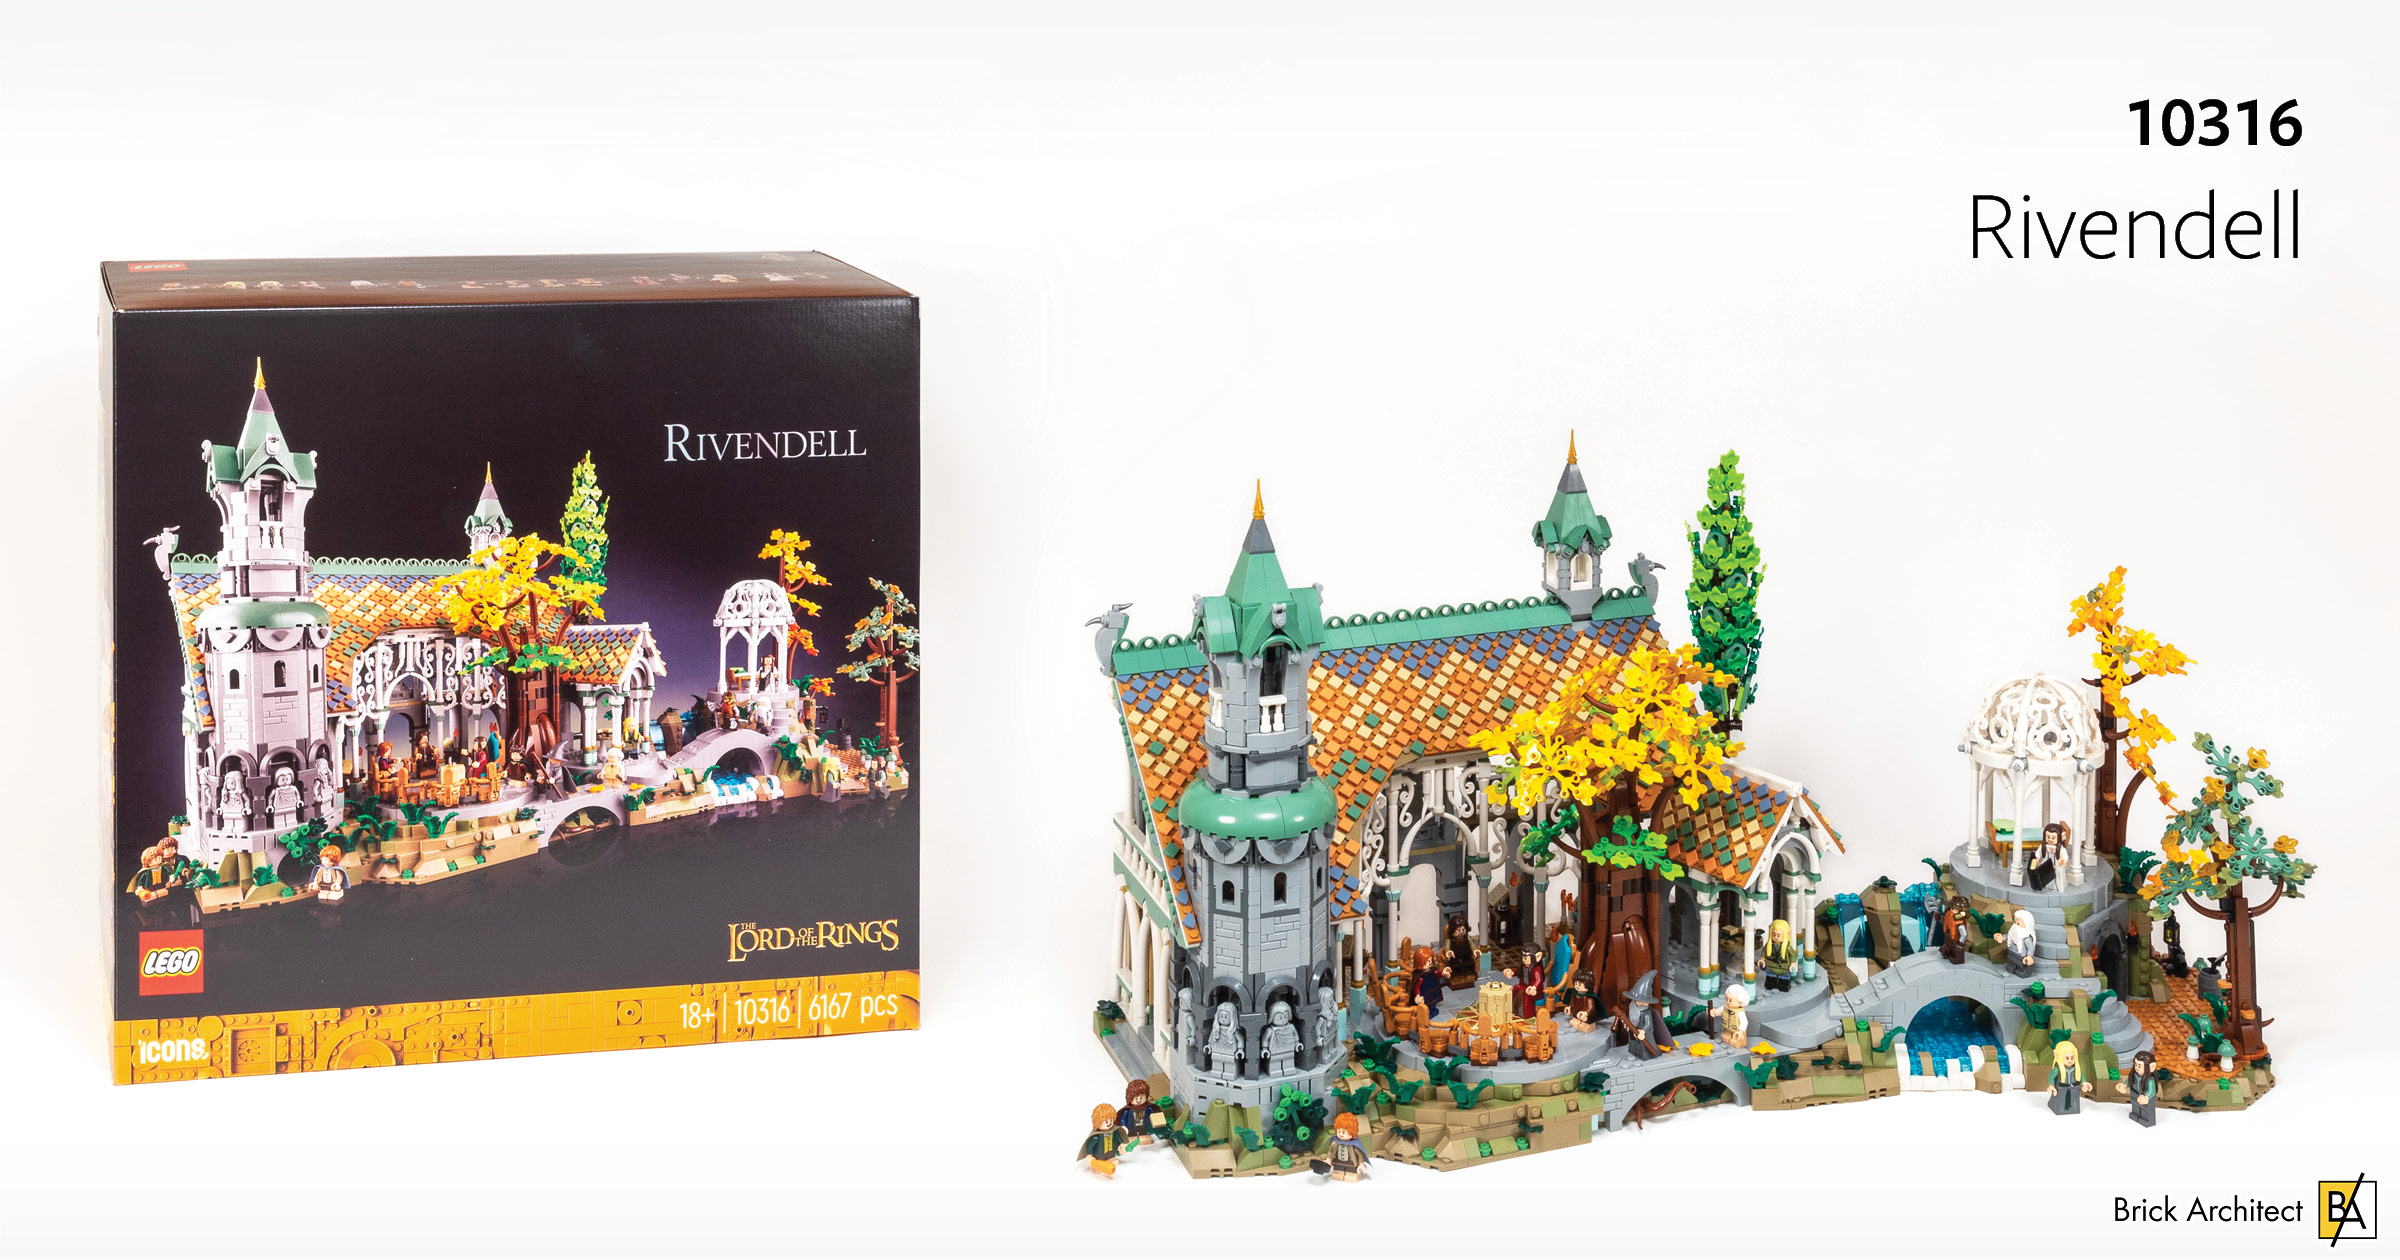 The new Rivendell set is absolutely gorgeous. Spend some time with our in-depth review of this top-notch LEGO set.